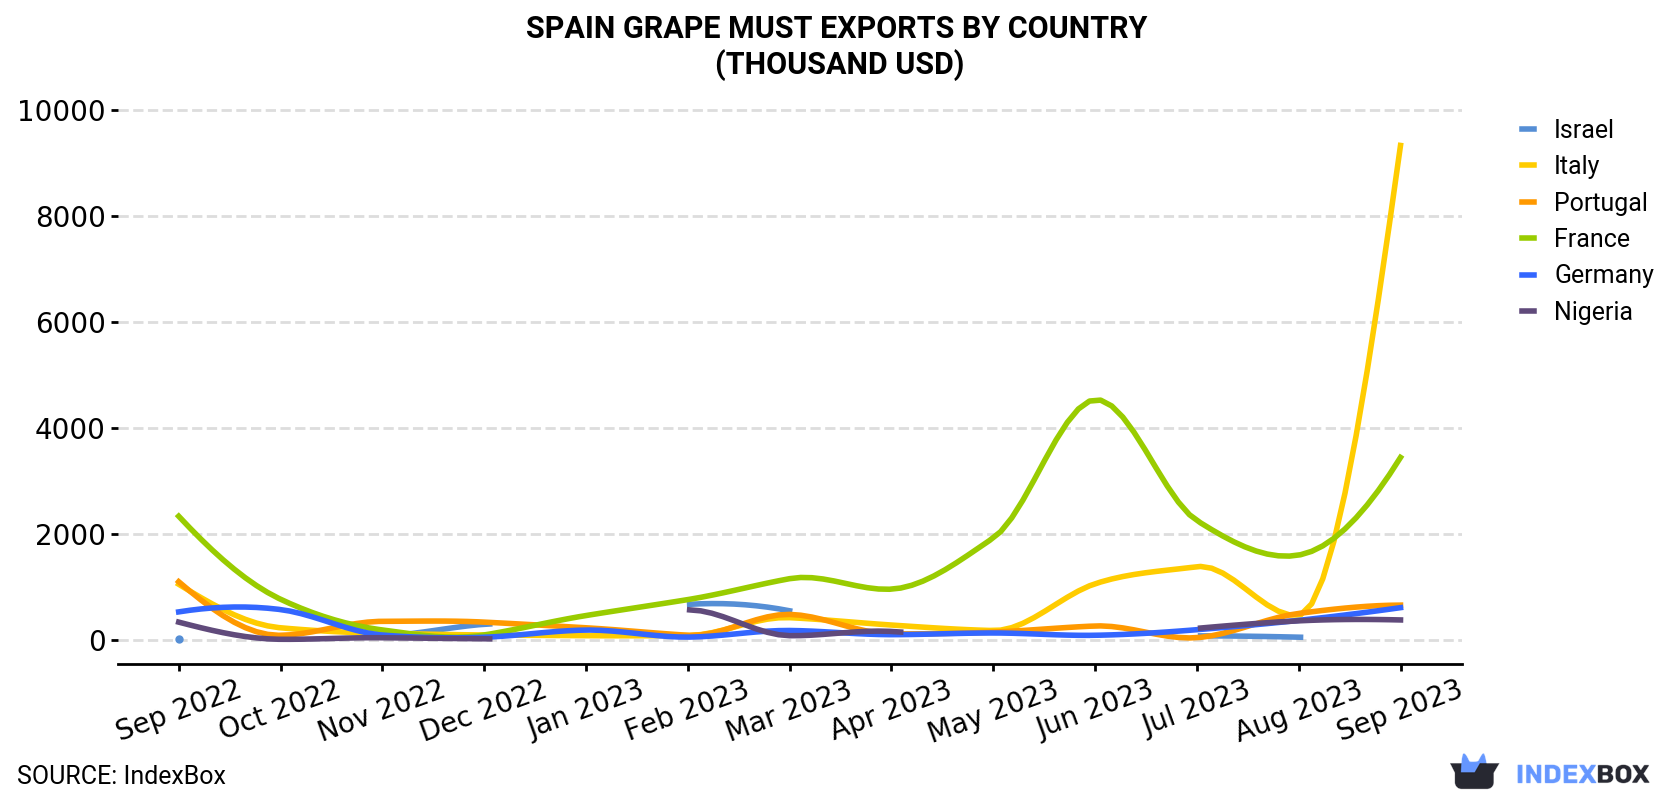 Spain Grape Must Exports By Country (Thousand USD)